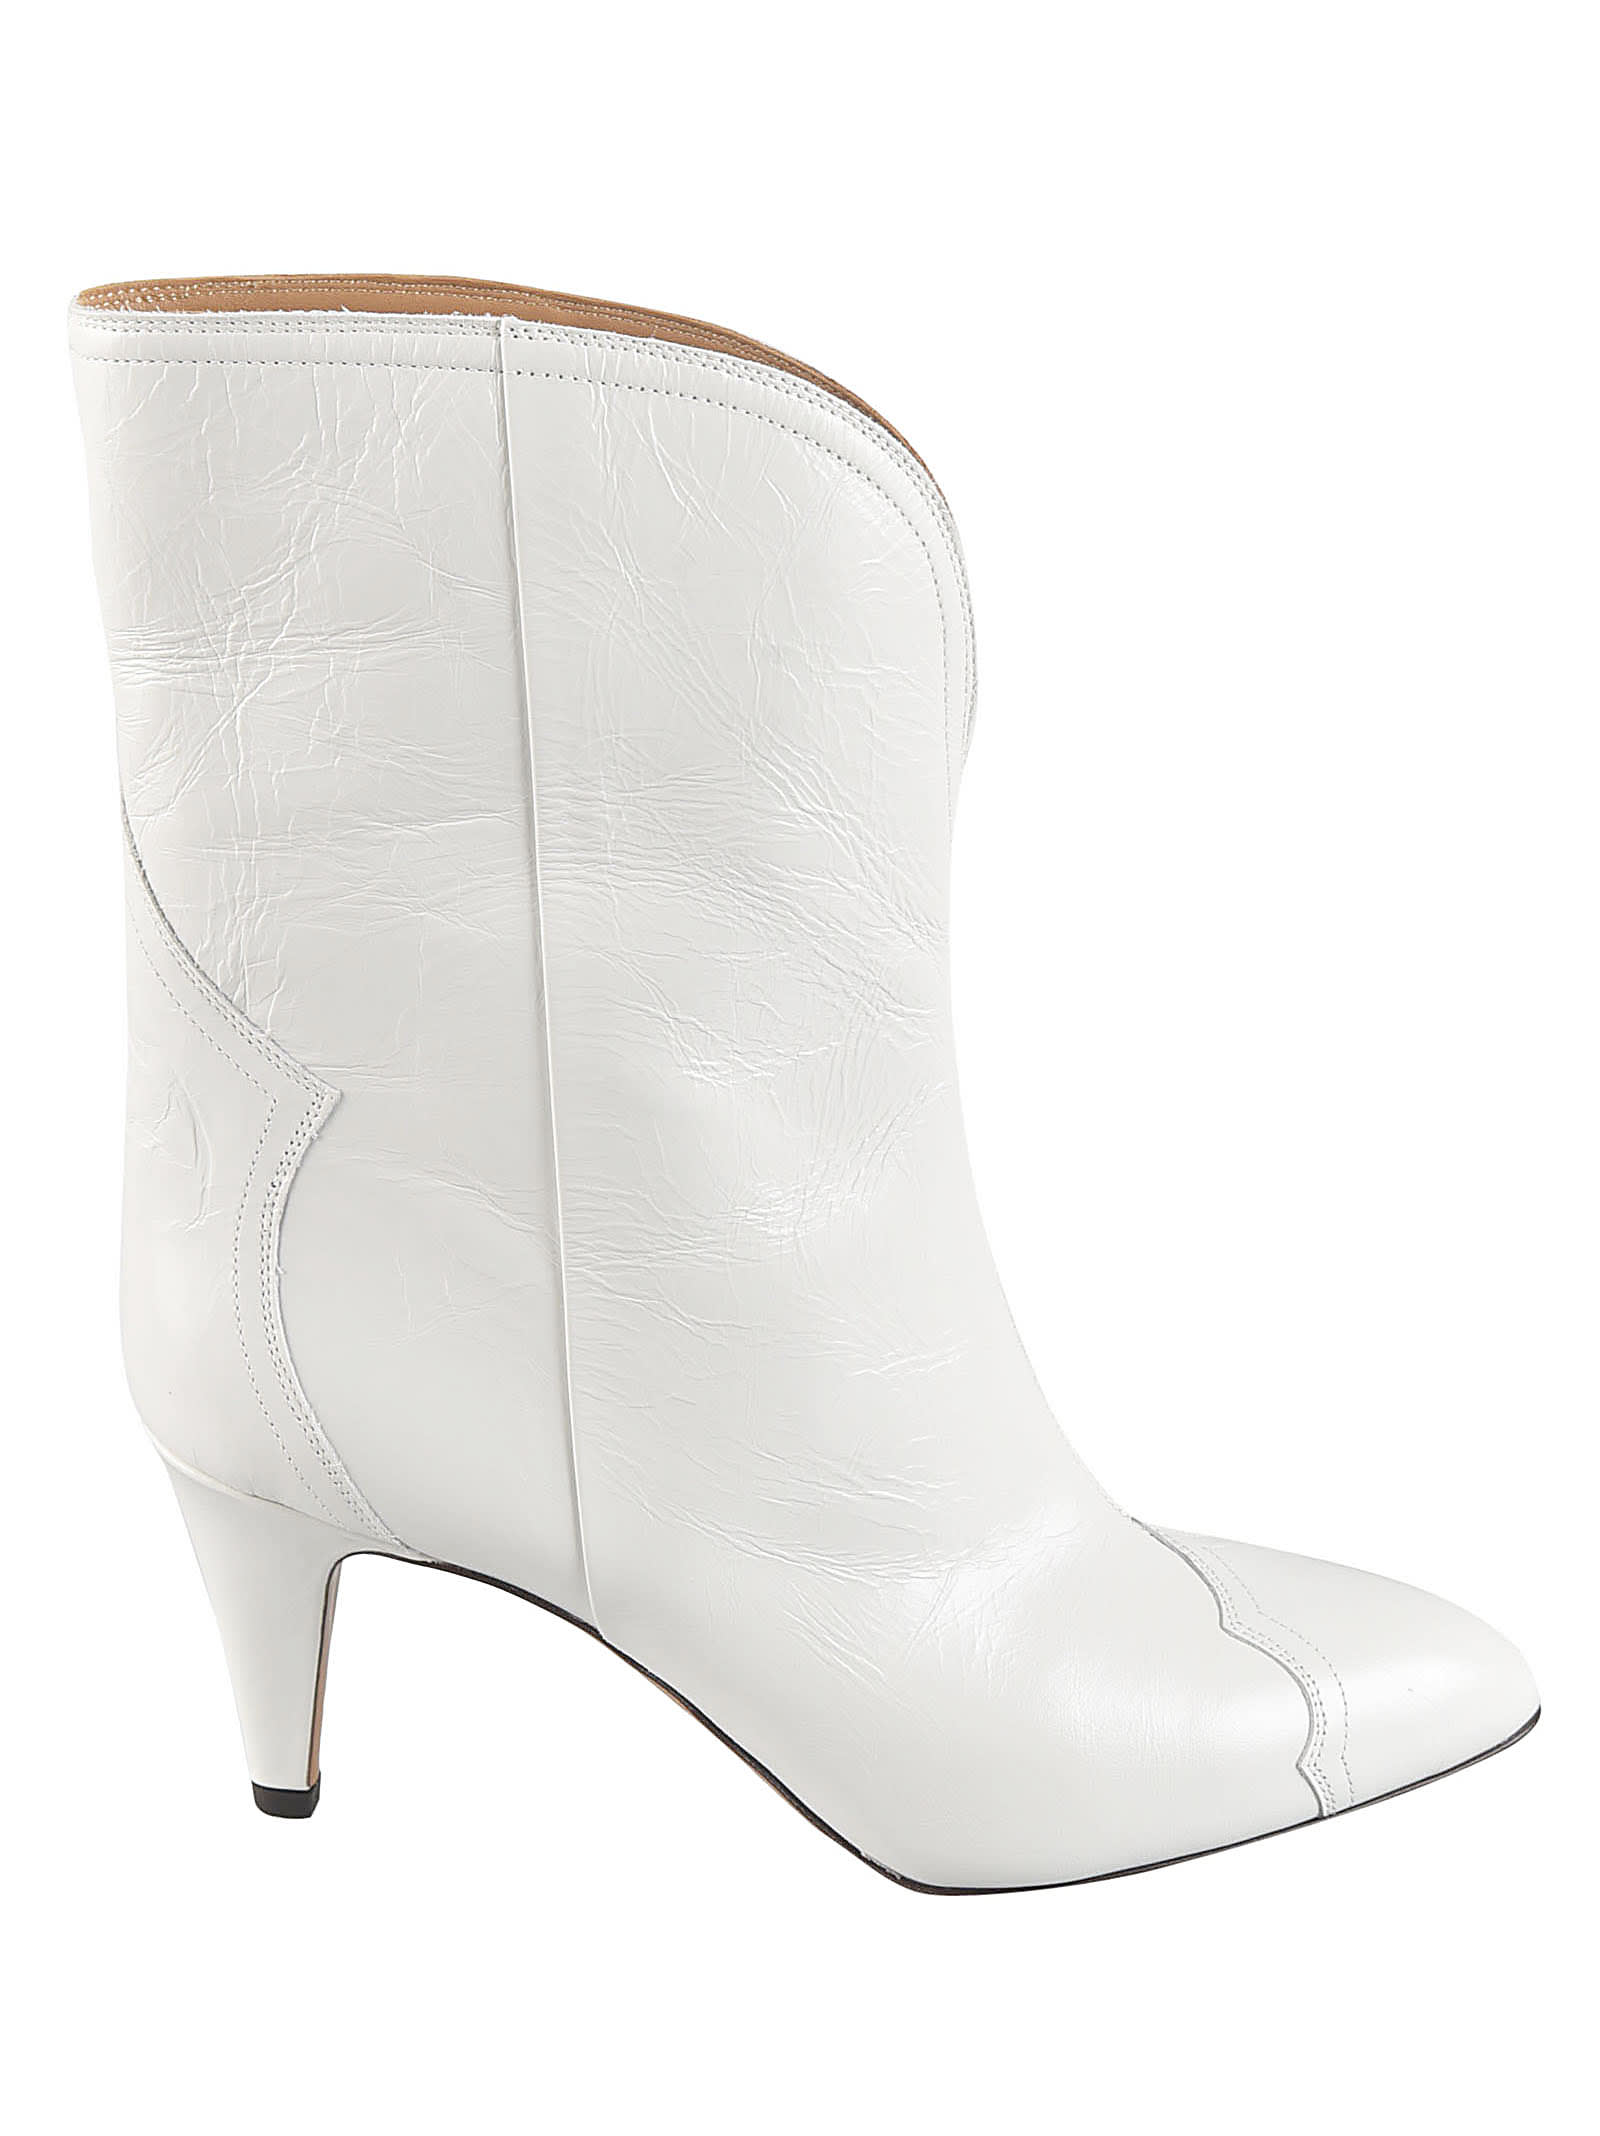 ISABEL MARANT DYTHO HIGH HEELS ANKLE BOOTS